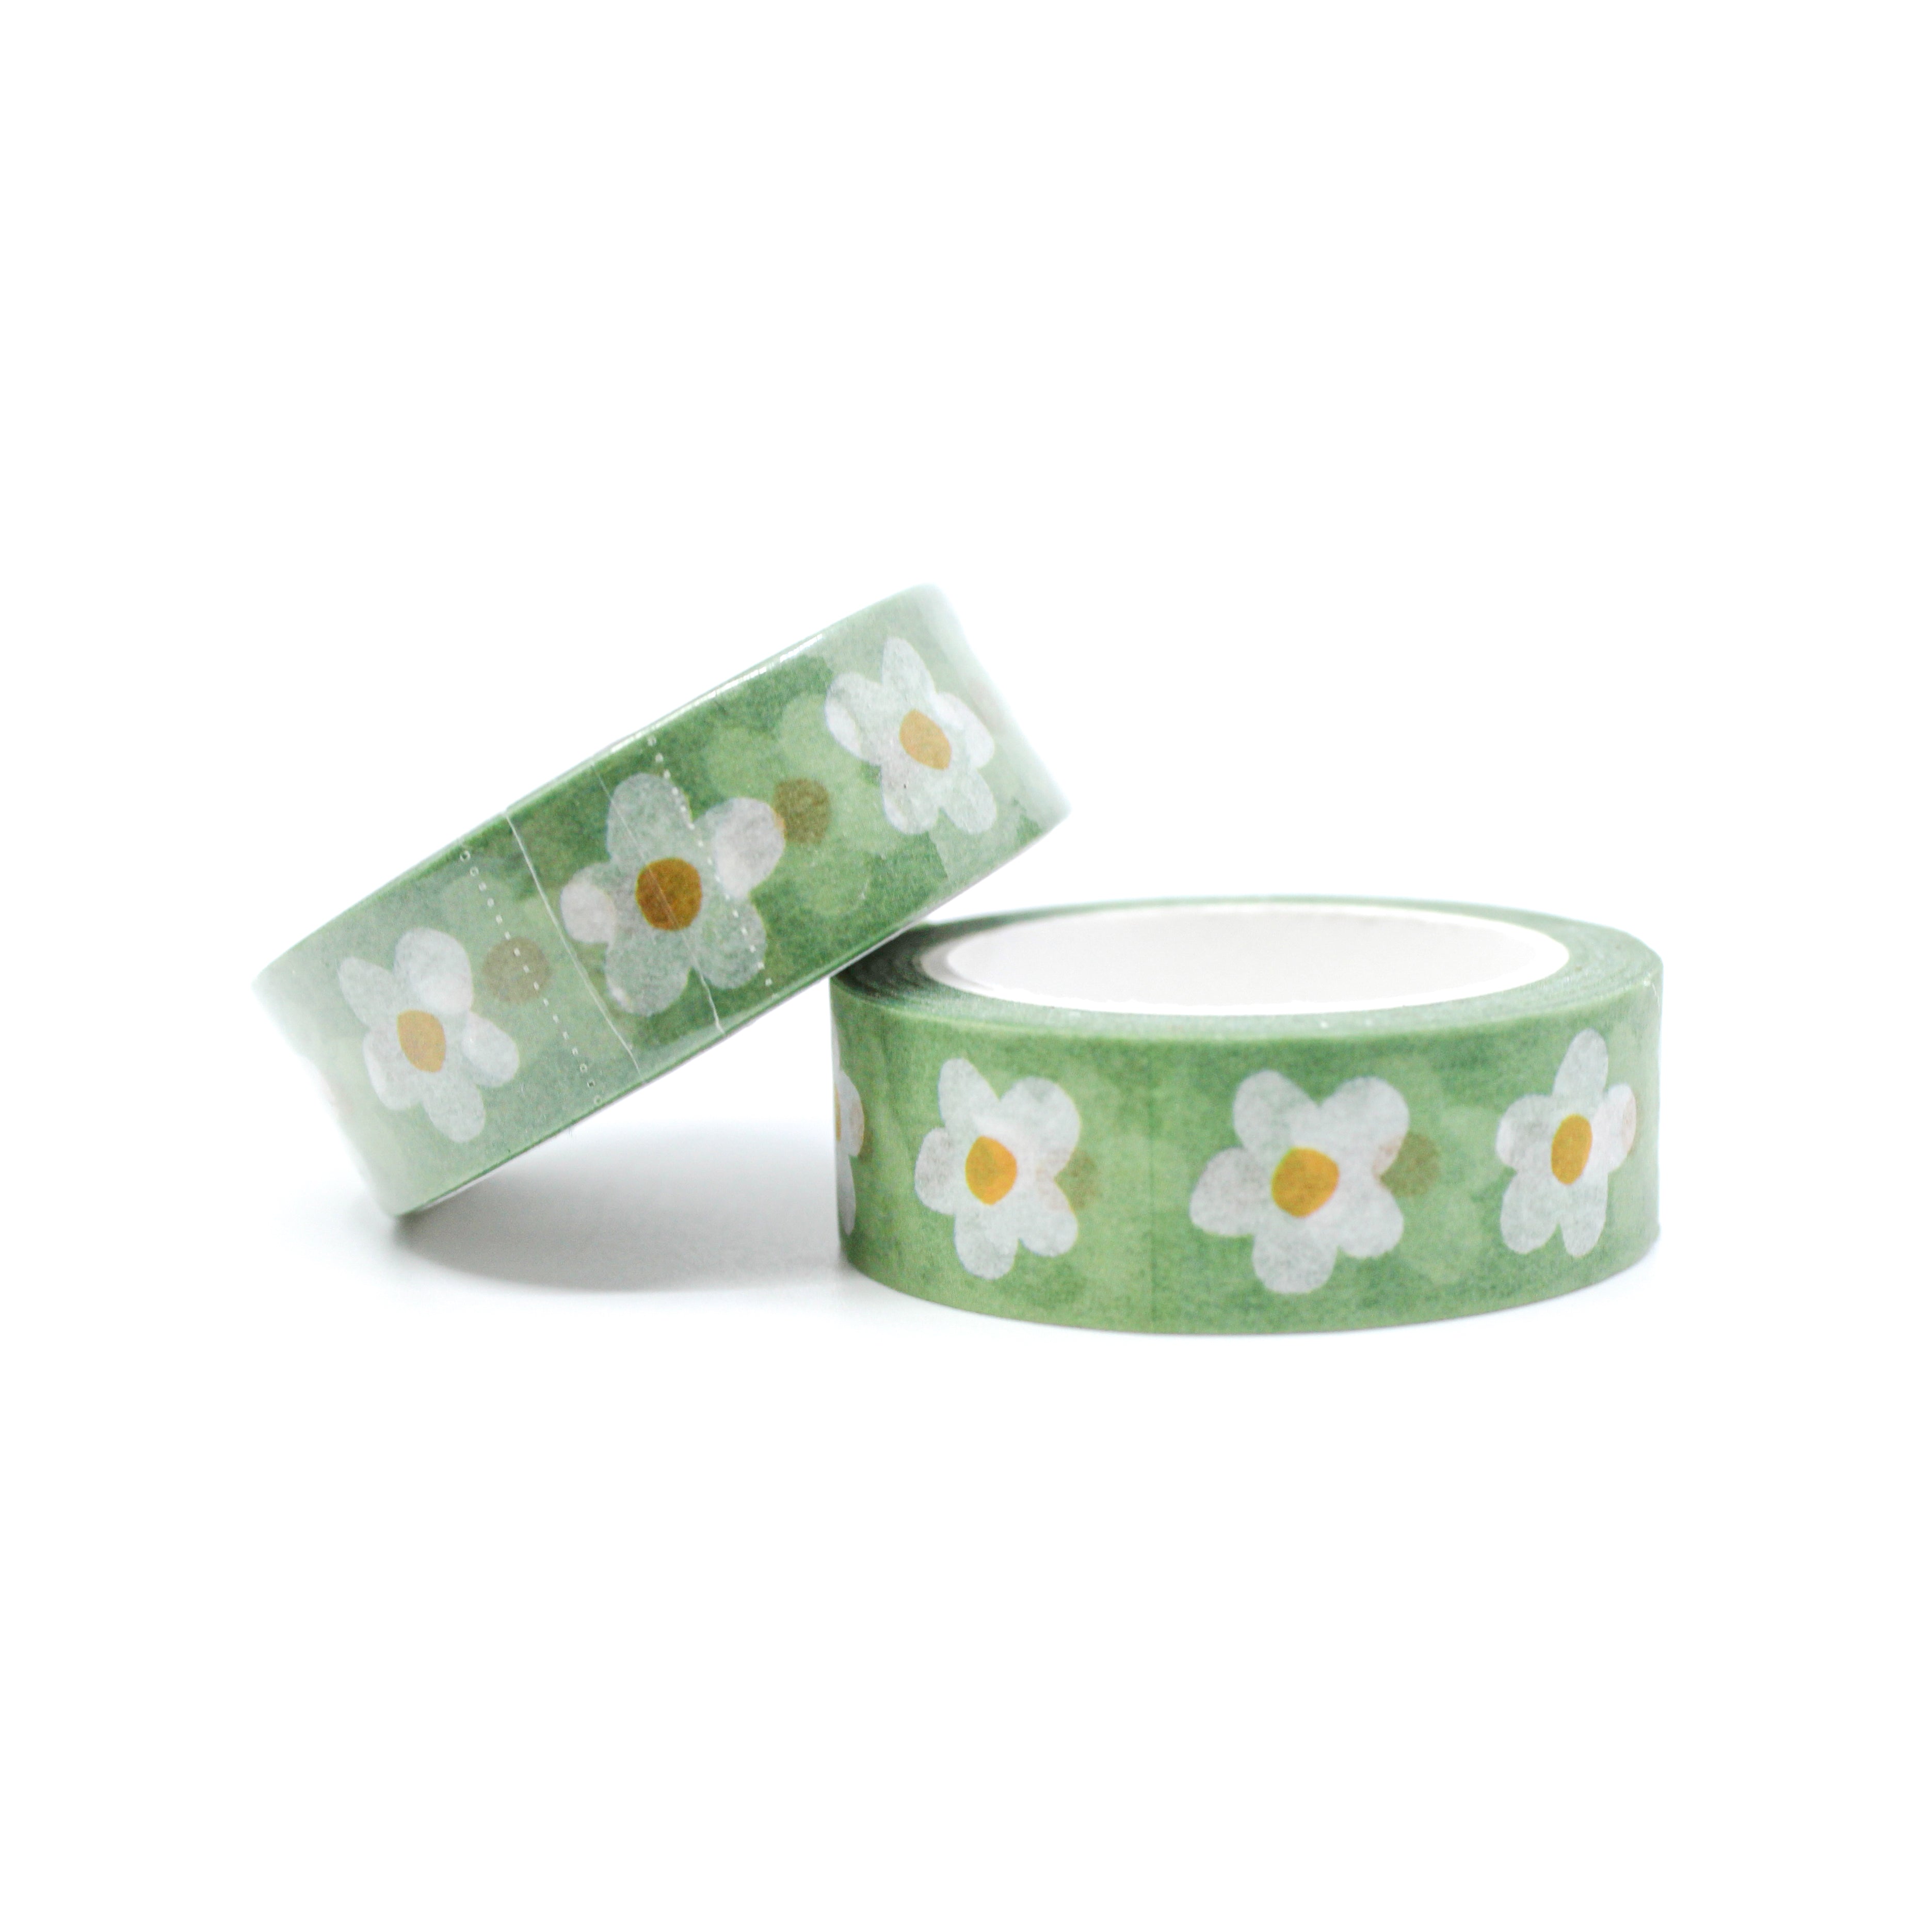 This is a roll of white daisy with green background washi tapes from BBB Supplies Craft Shop